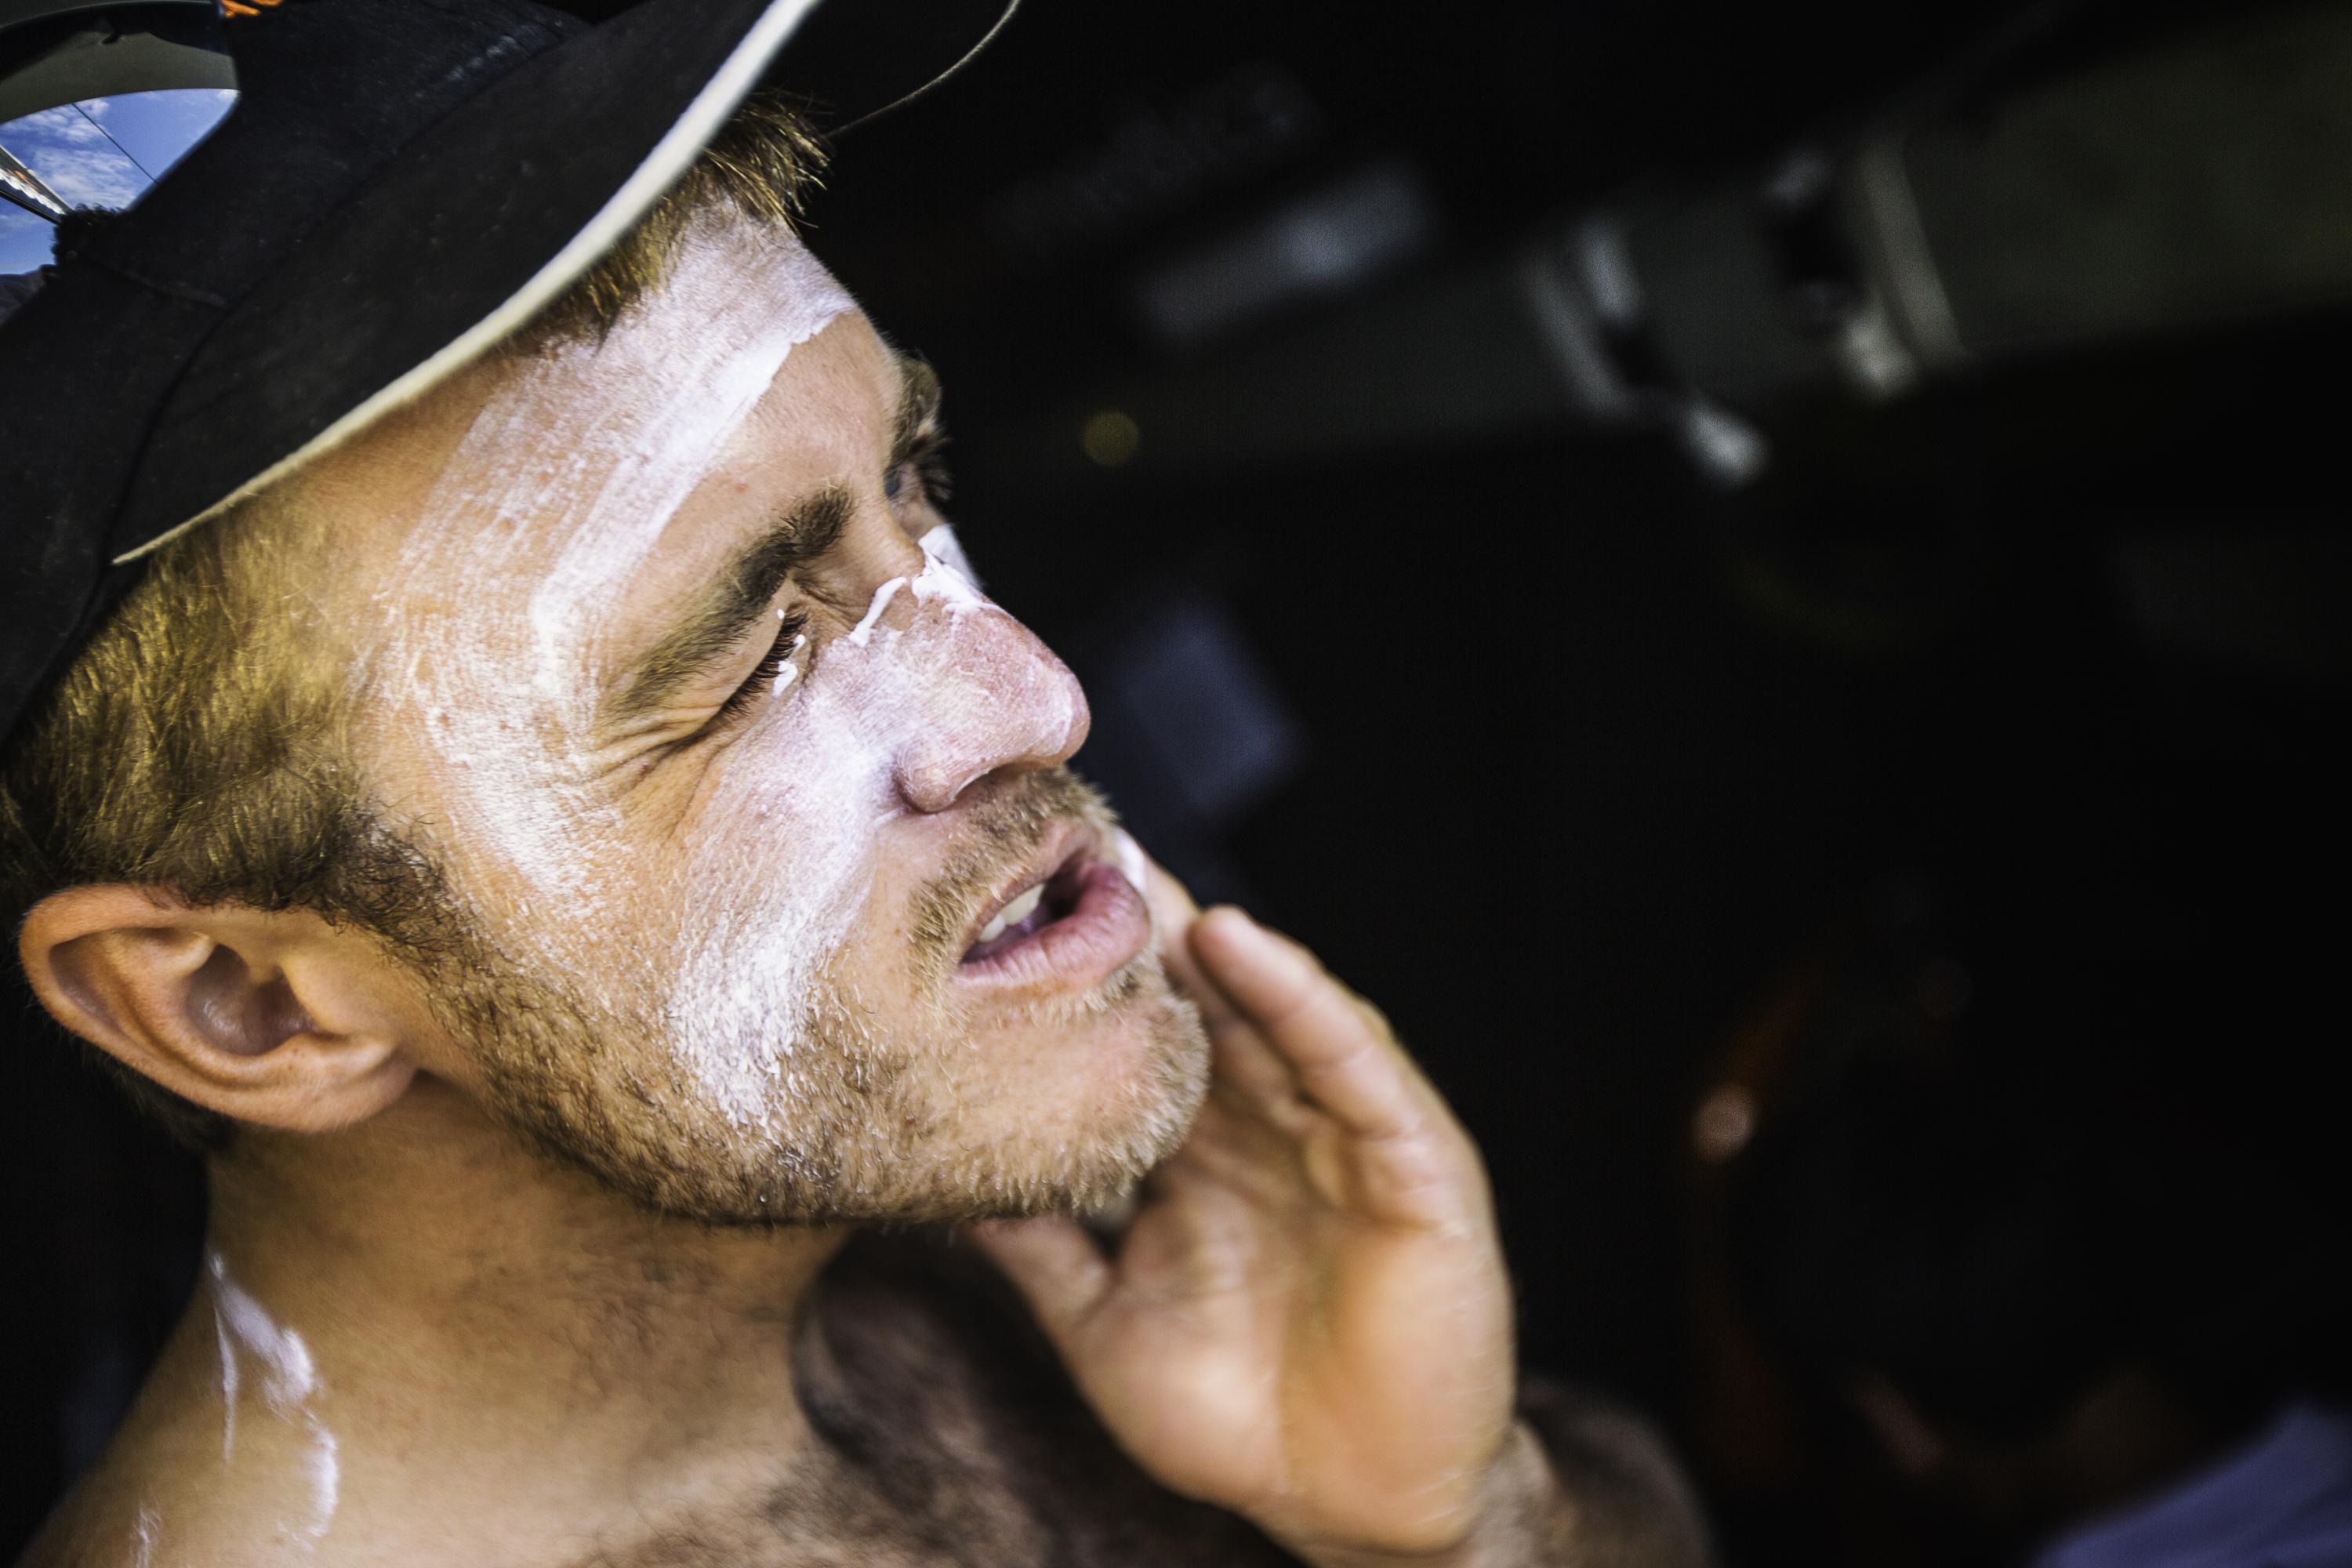 In this handout image provided by the Volvo Ocean Race, onboard Team Alvimedica. Nick Dana applying a healthy dose of sunscreen to protect his face from the intense sun of the tropics during Leg 6 from Itajai to Newport starting on April 19, 2015 in Itajai, Brazil.